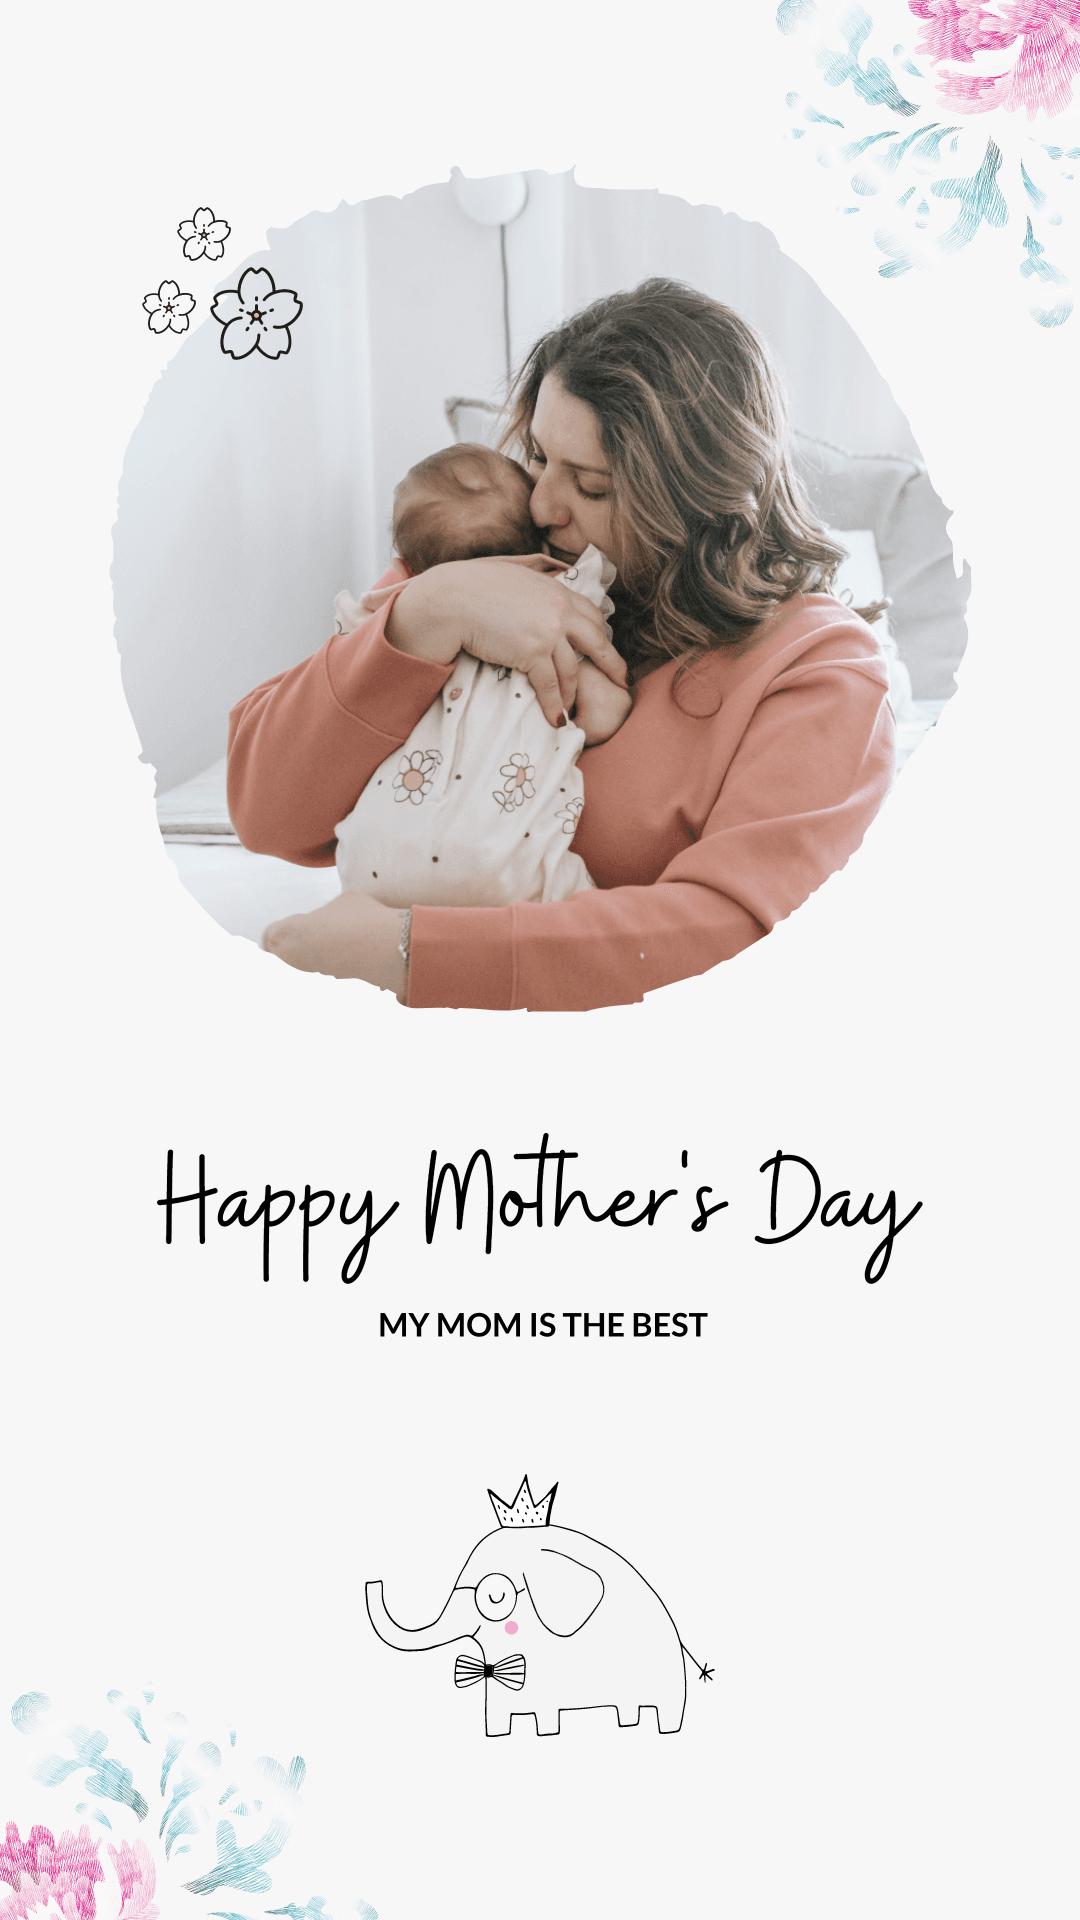 floral-background-my-mom-is-the-best-happy-mothers-day-instagram-story-template-thumbnail-img